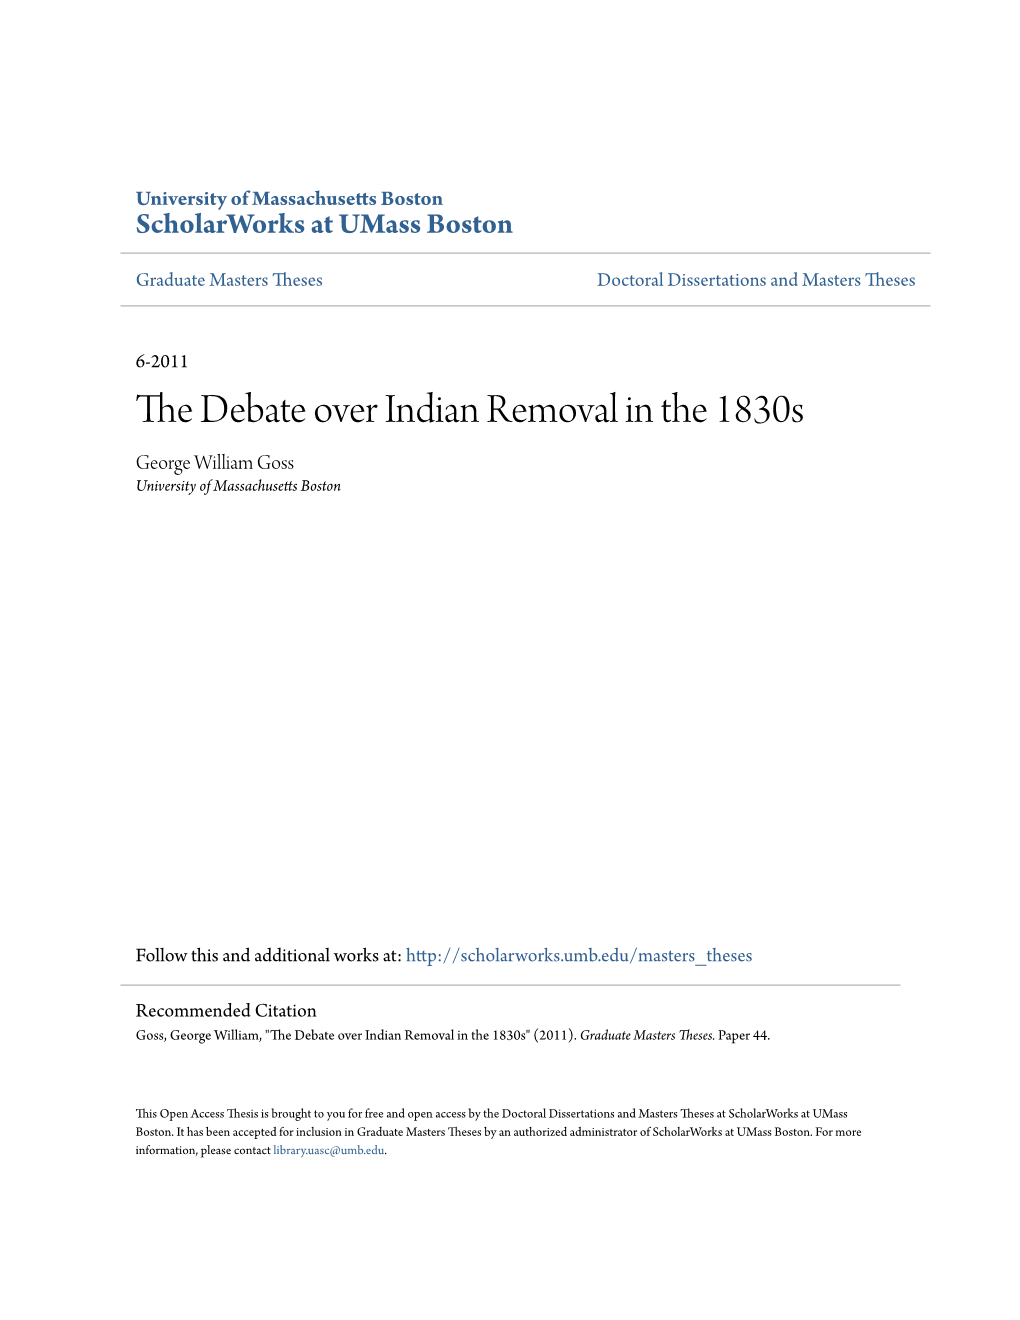 THE DEBATE OVER INDIAN REMOVAL in the 1830S